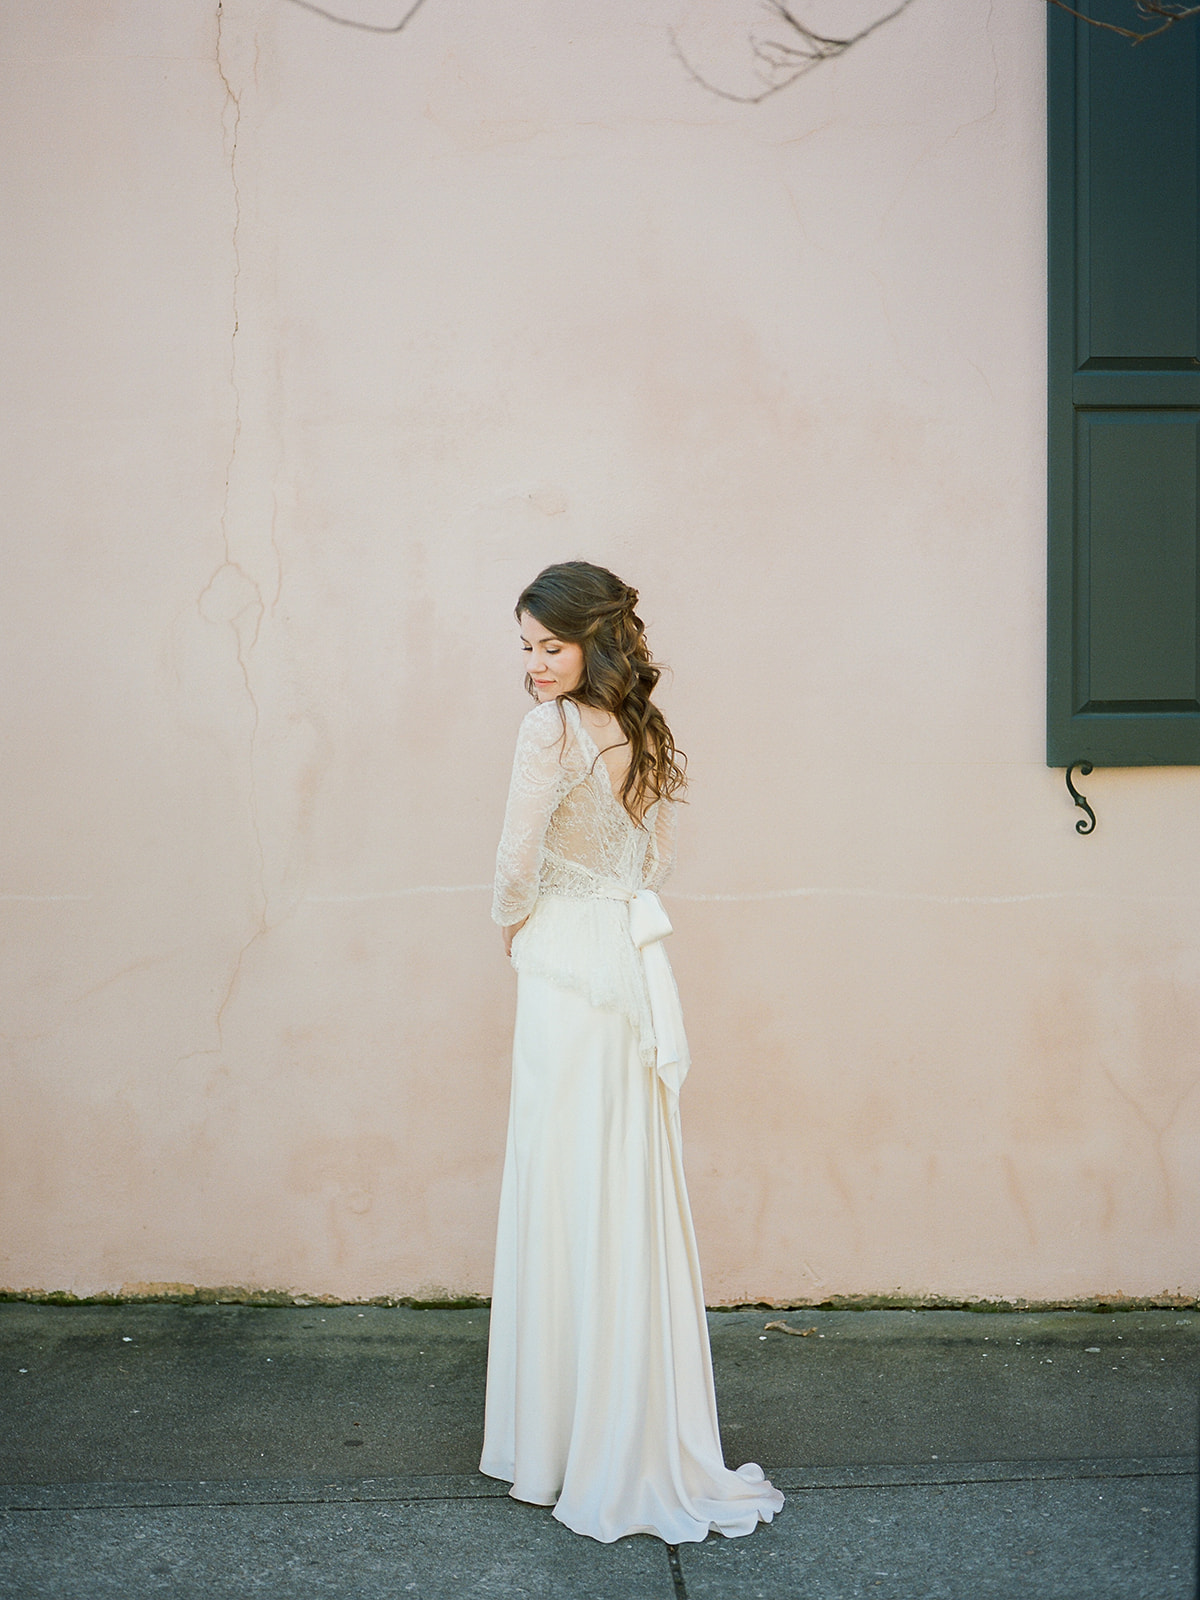 Winter wedding in Charleston with a vintage inspired wedding dress, designed by destination wedding planner Willow and Oak Events and captured by Kylee Yee Photography